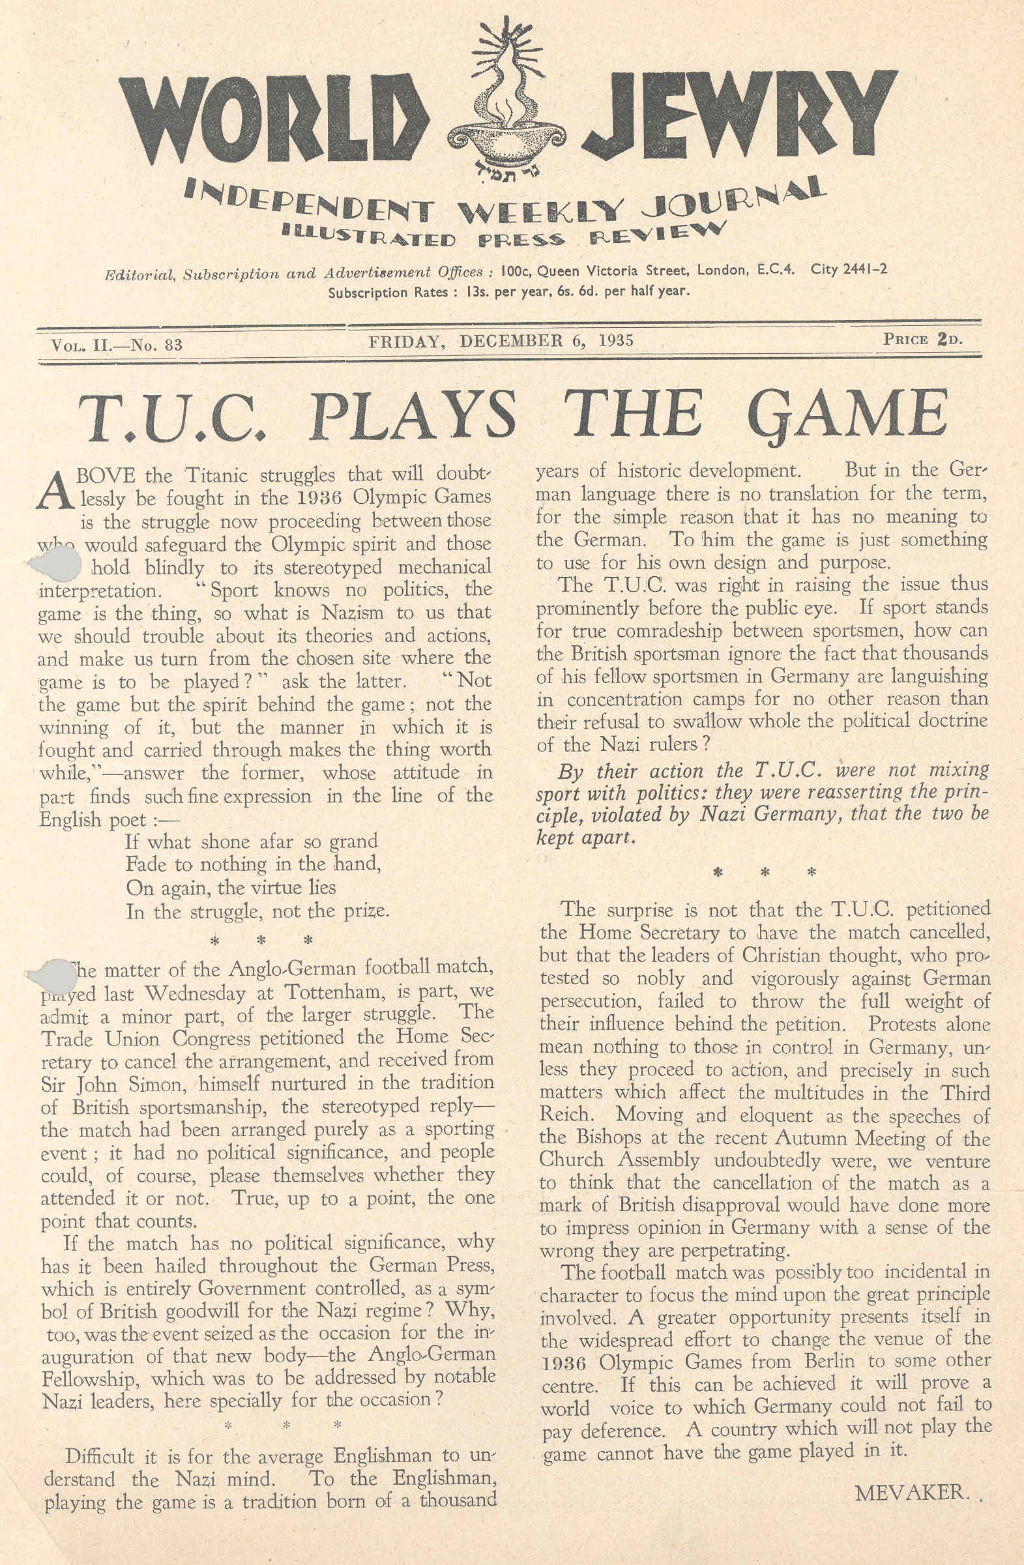 TUC plays the game, 1935